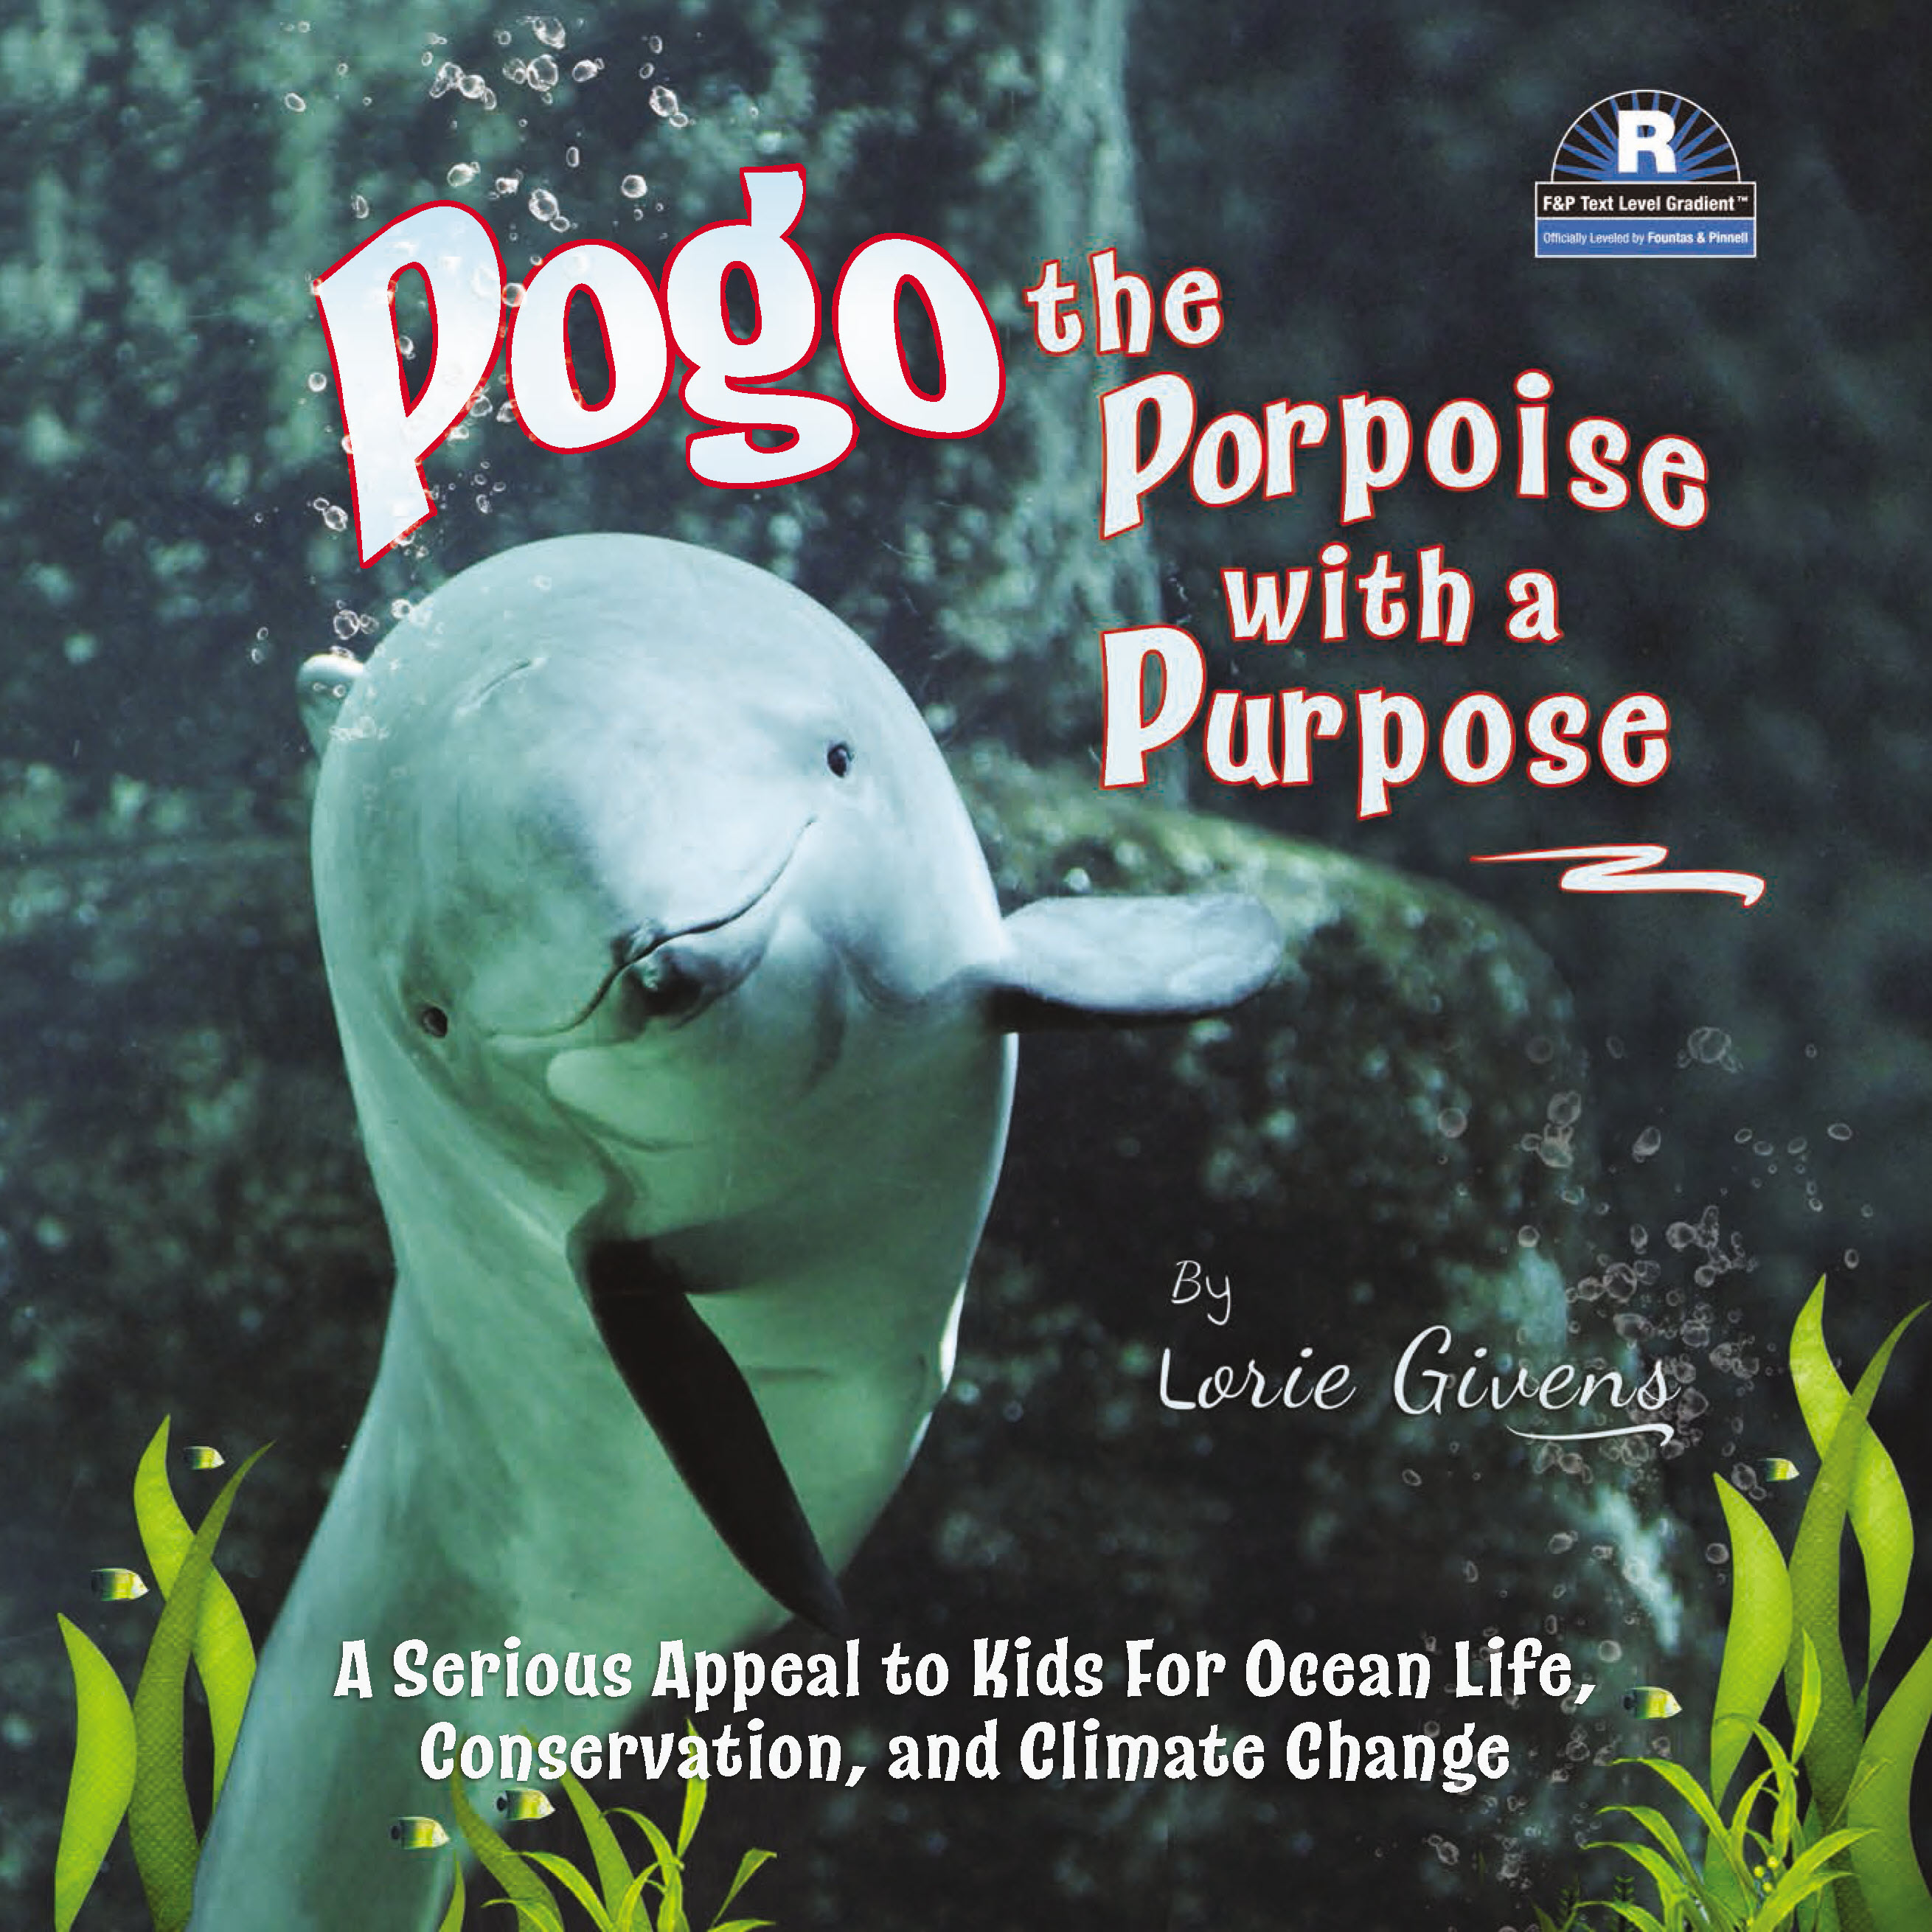 Pogo the Porpoise with a Purpose - A Serious Appeal to Kids for Ocean Life, Conservation, and Climate Change